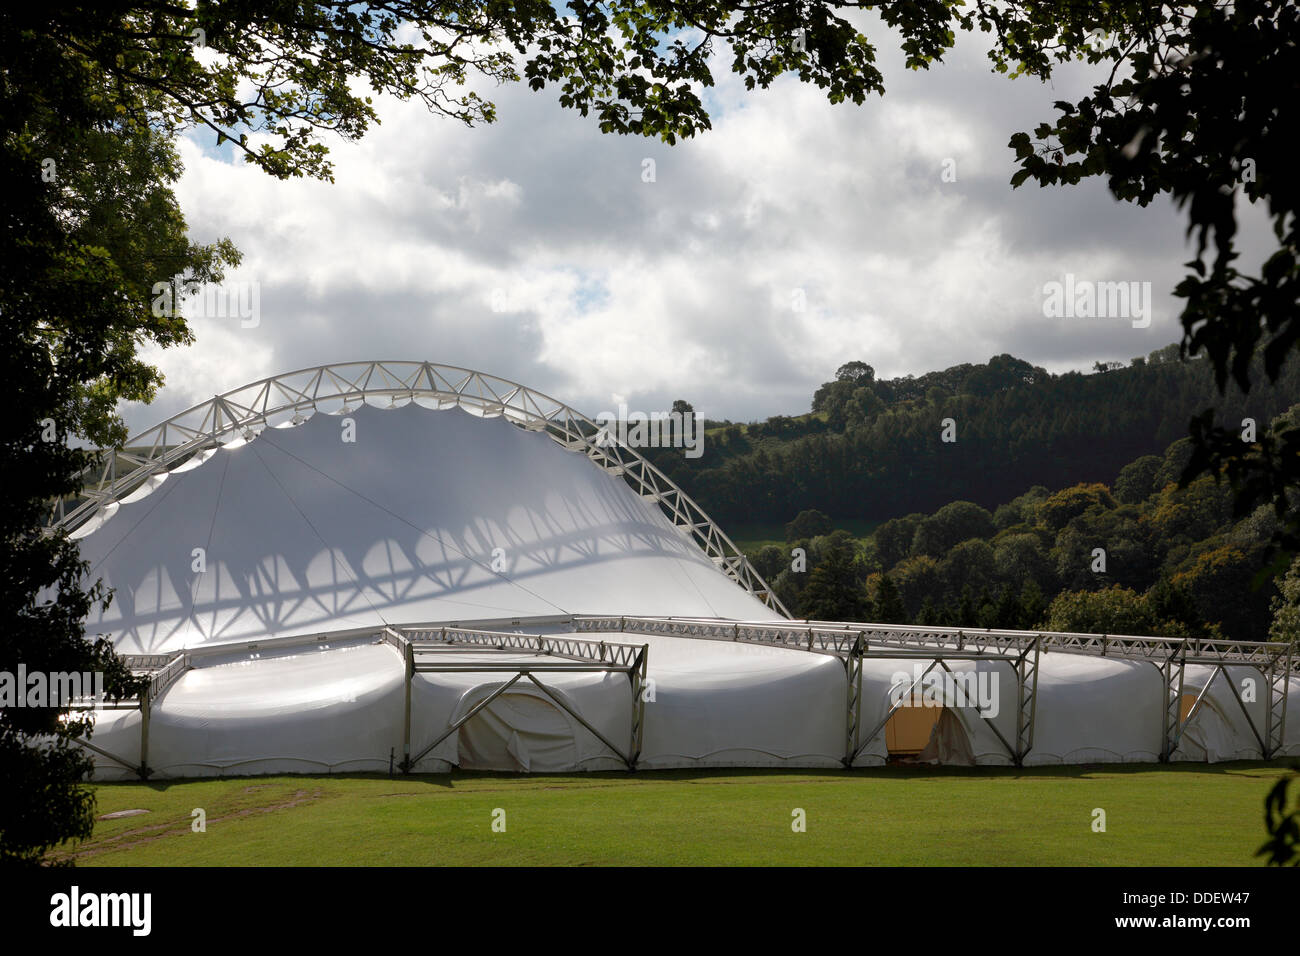 The Royal International pavilion in Llangollen, a multi purpose venue, used for the annual International Musical Eisteddfod Stock Photo